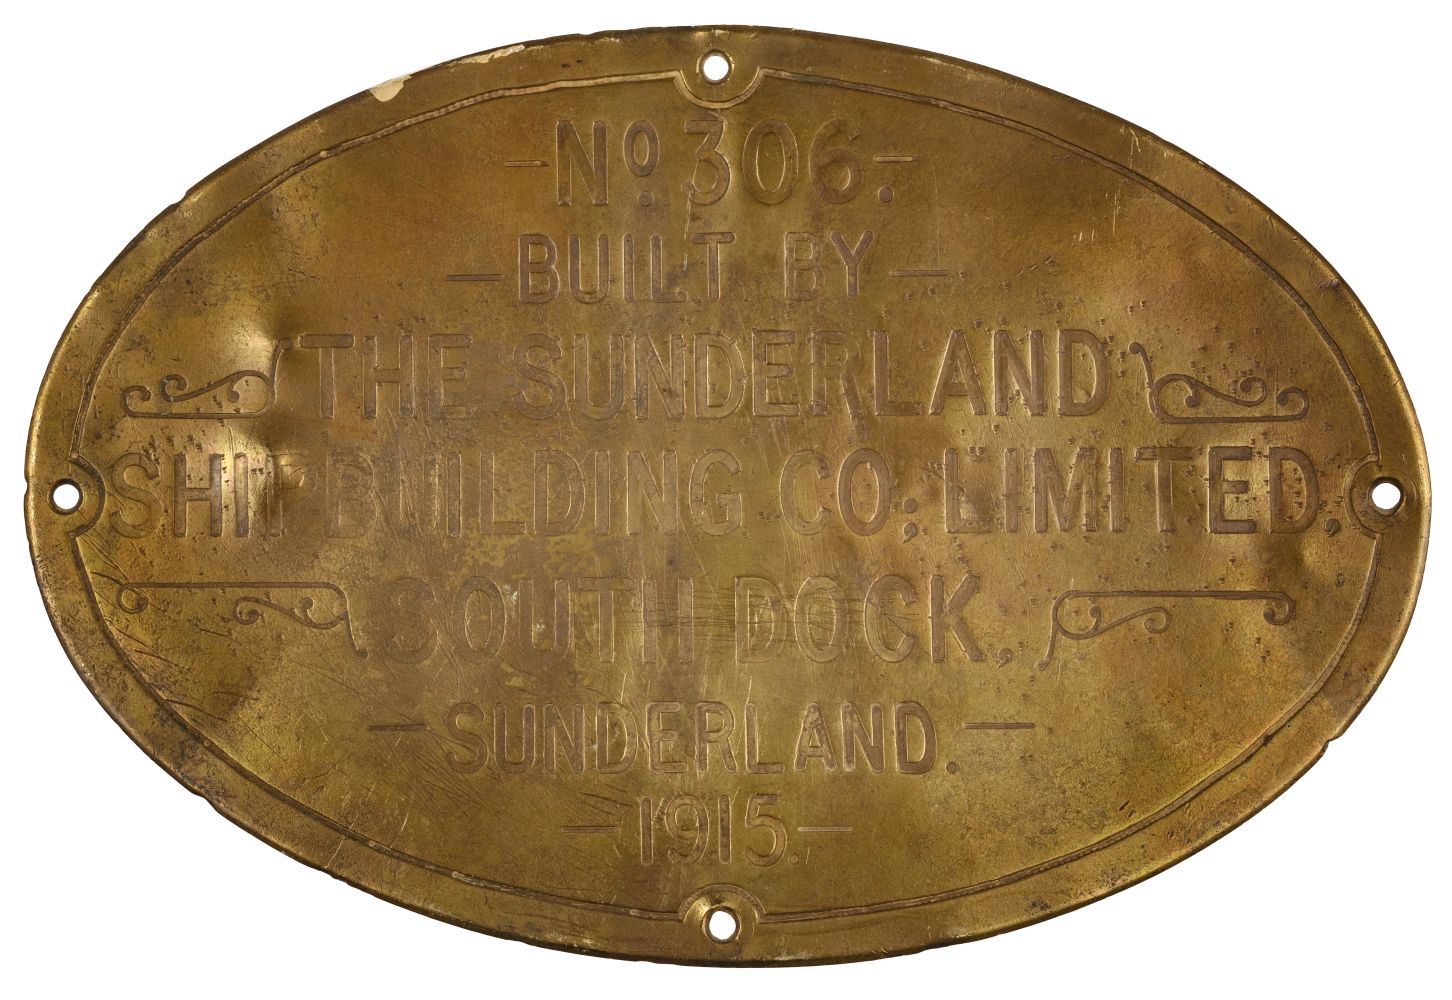 Shipyard Plate. An oval brass plate stamped No 306 built by the Sunderland Shipbuilding Co